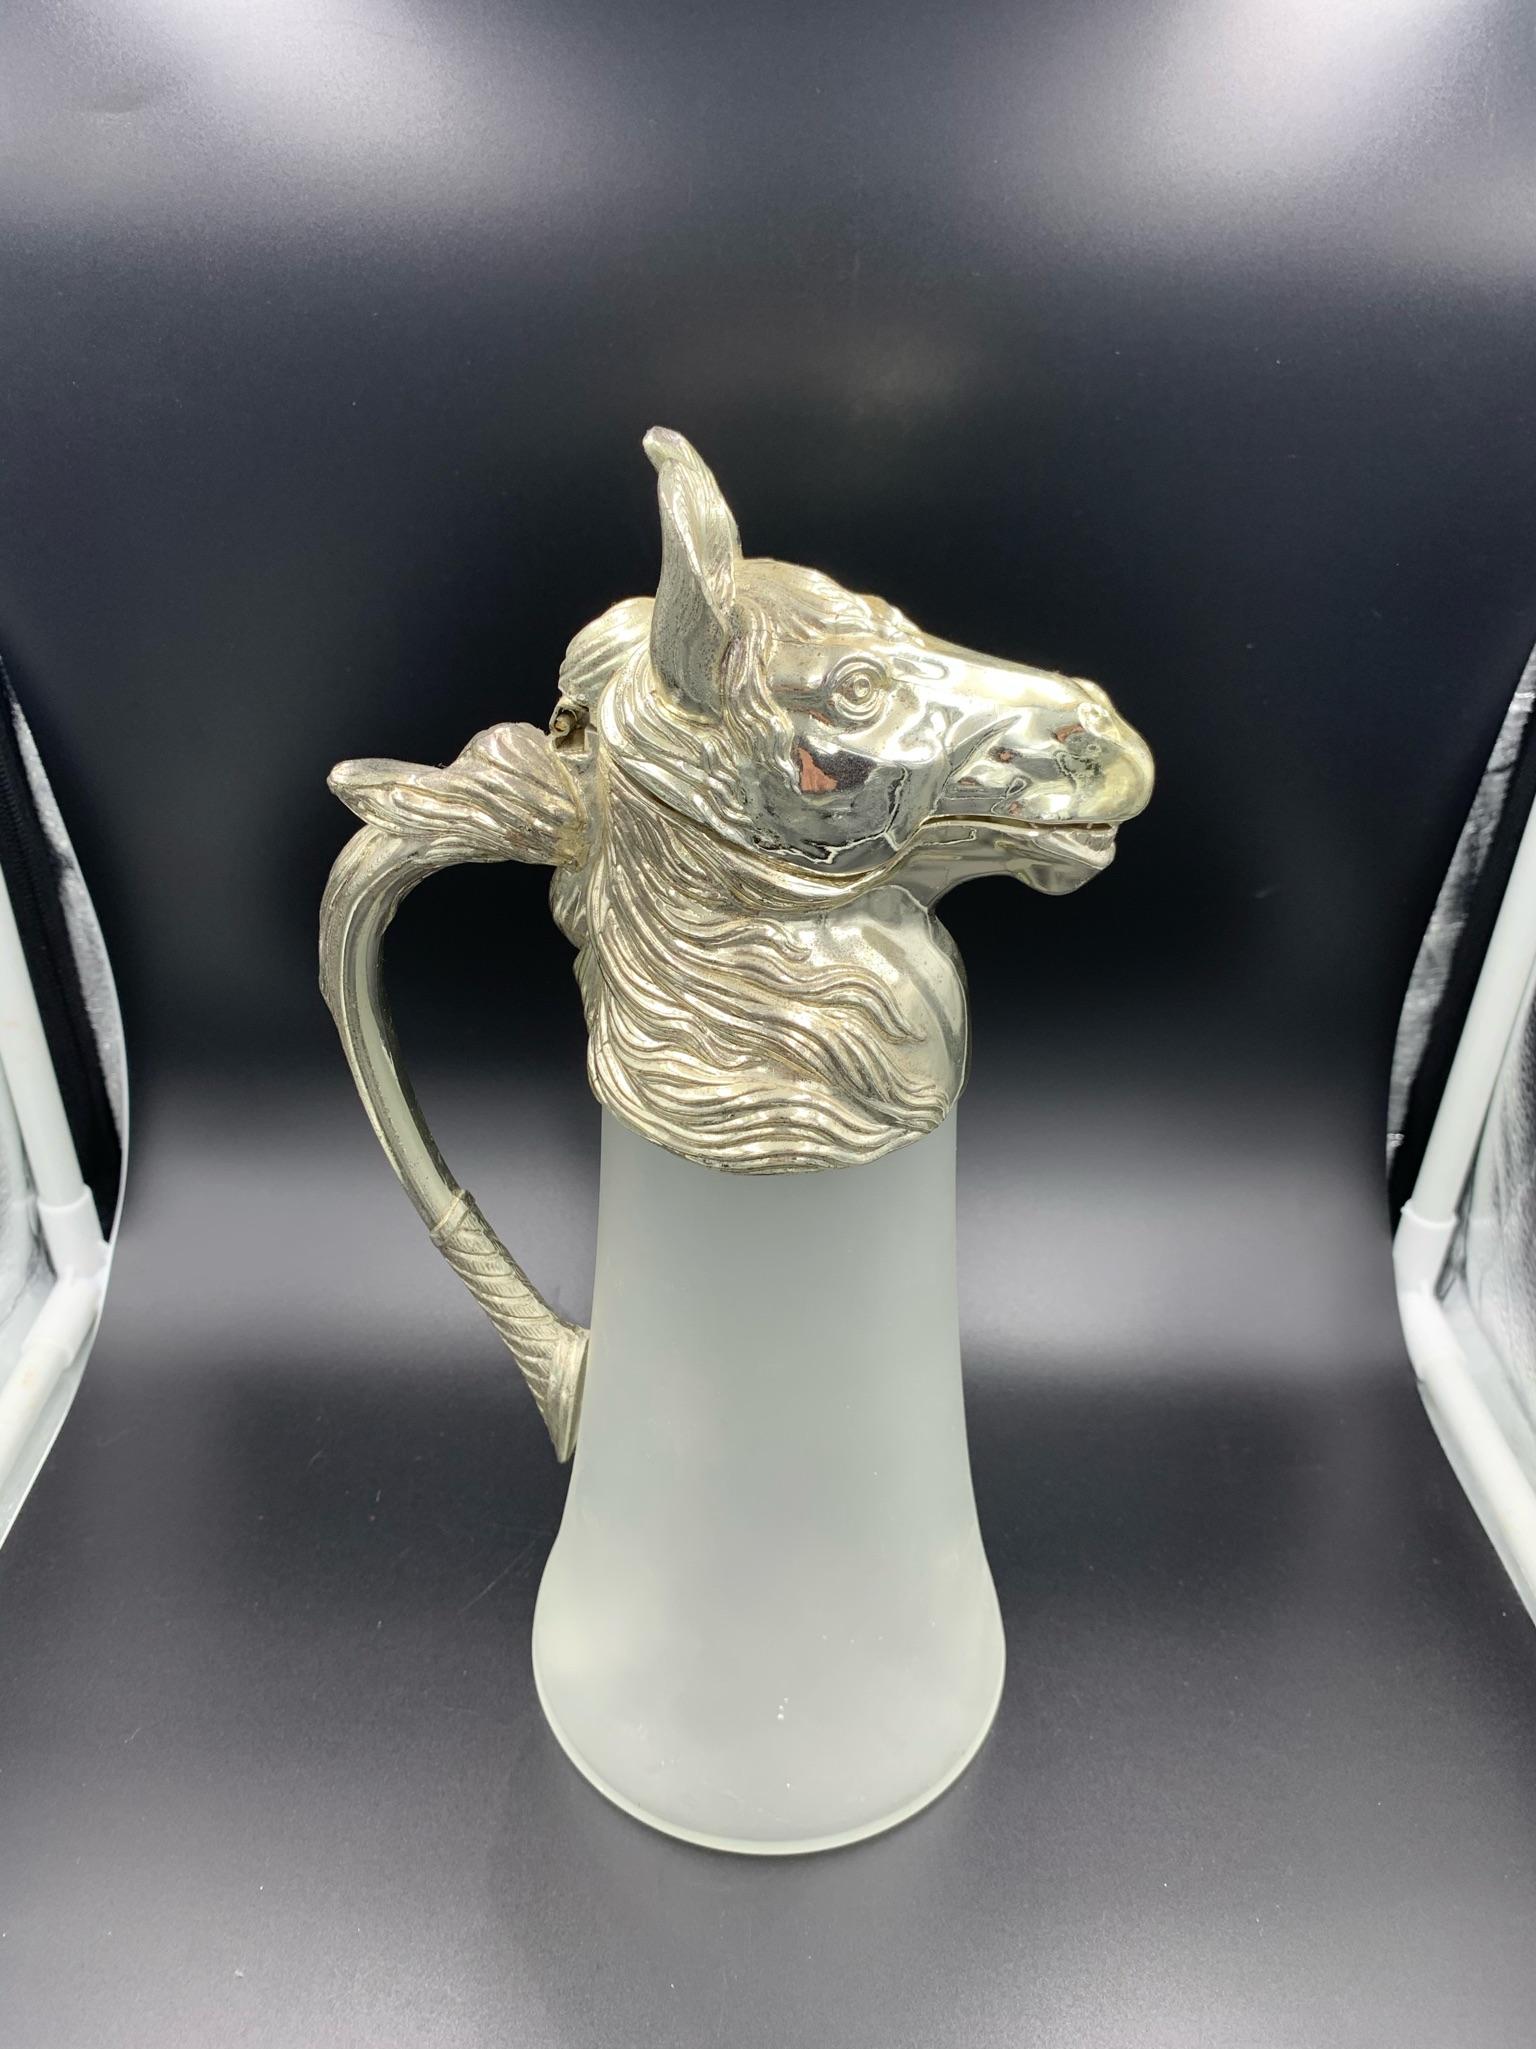 Equestrian Silver Plate Nickel Horse Head and Frosted Glass Decanter Pitcher For Sale 1